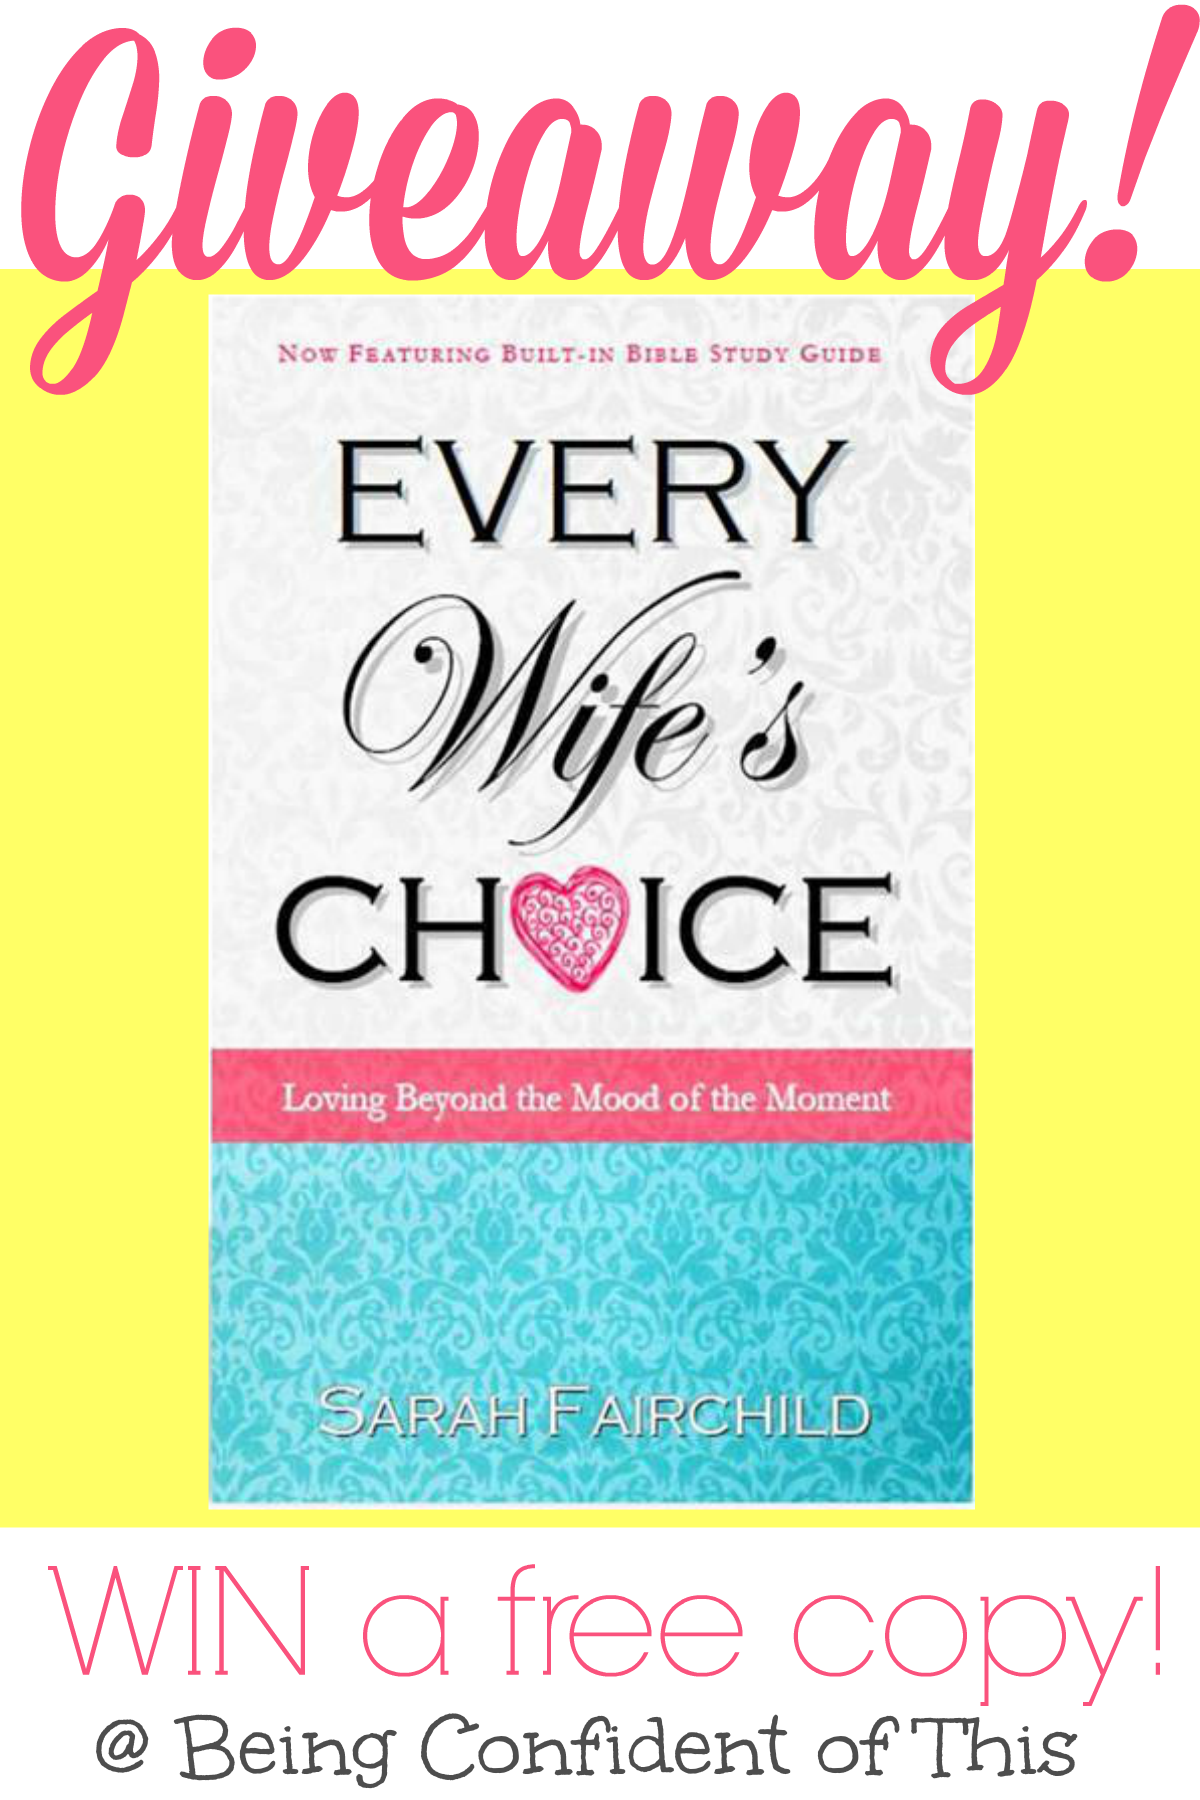 GIVEAWAY:  Enter now to win a free copy of new release Every Wife's Choice by Sarah Fairchild. Every Wife's Choice teaches women how to choose love in spite of our fickle moods.  Combining humorous anecdotes with Greek word study, the author leads women to understand how to overcome the "mood of the moment."  Her applications of the First Corinthians love passage are both practical and biblical! 